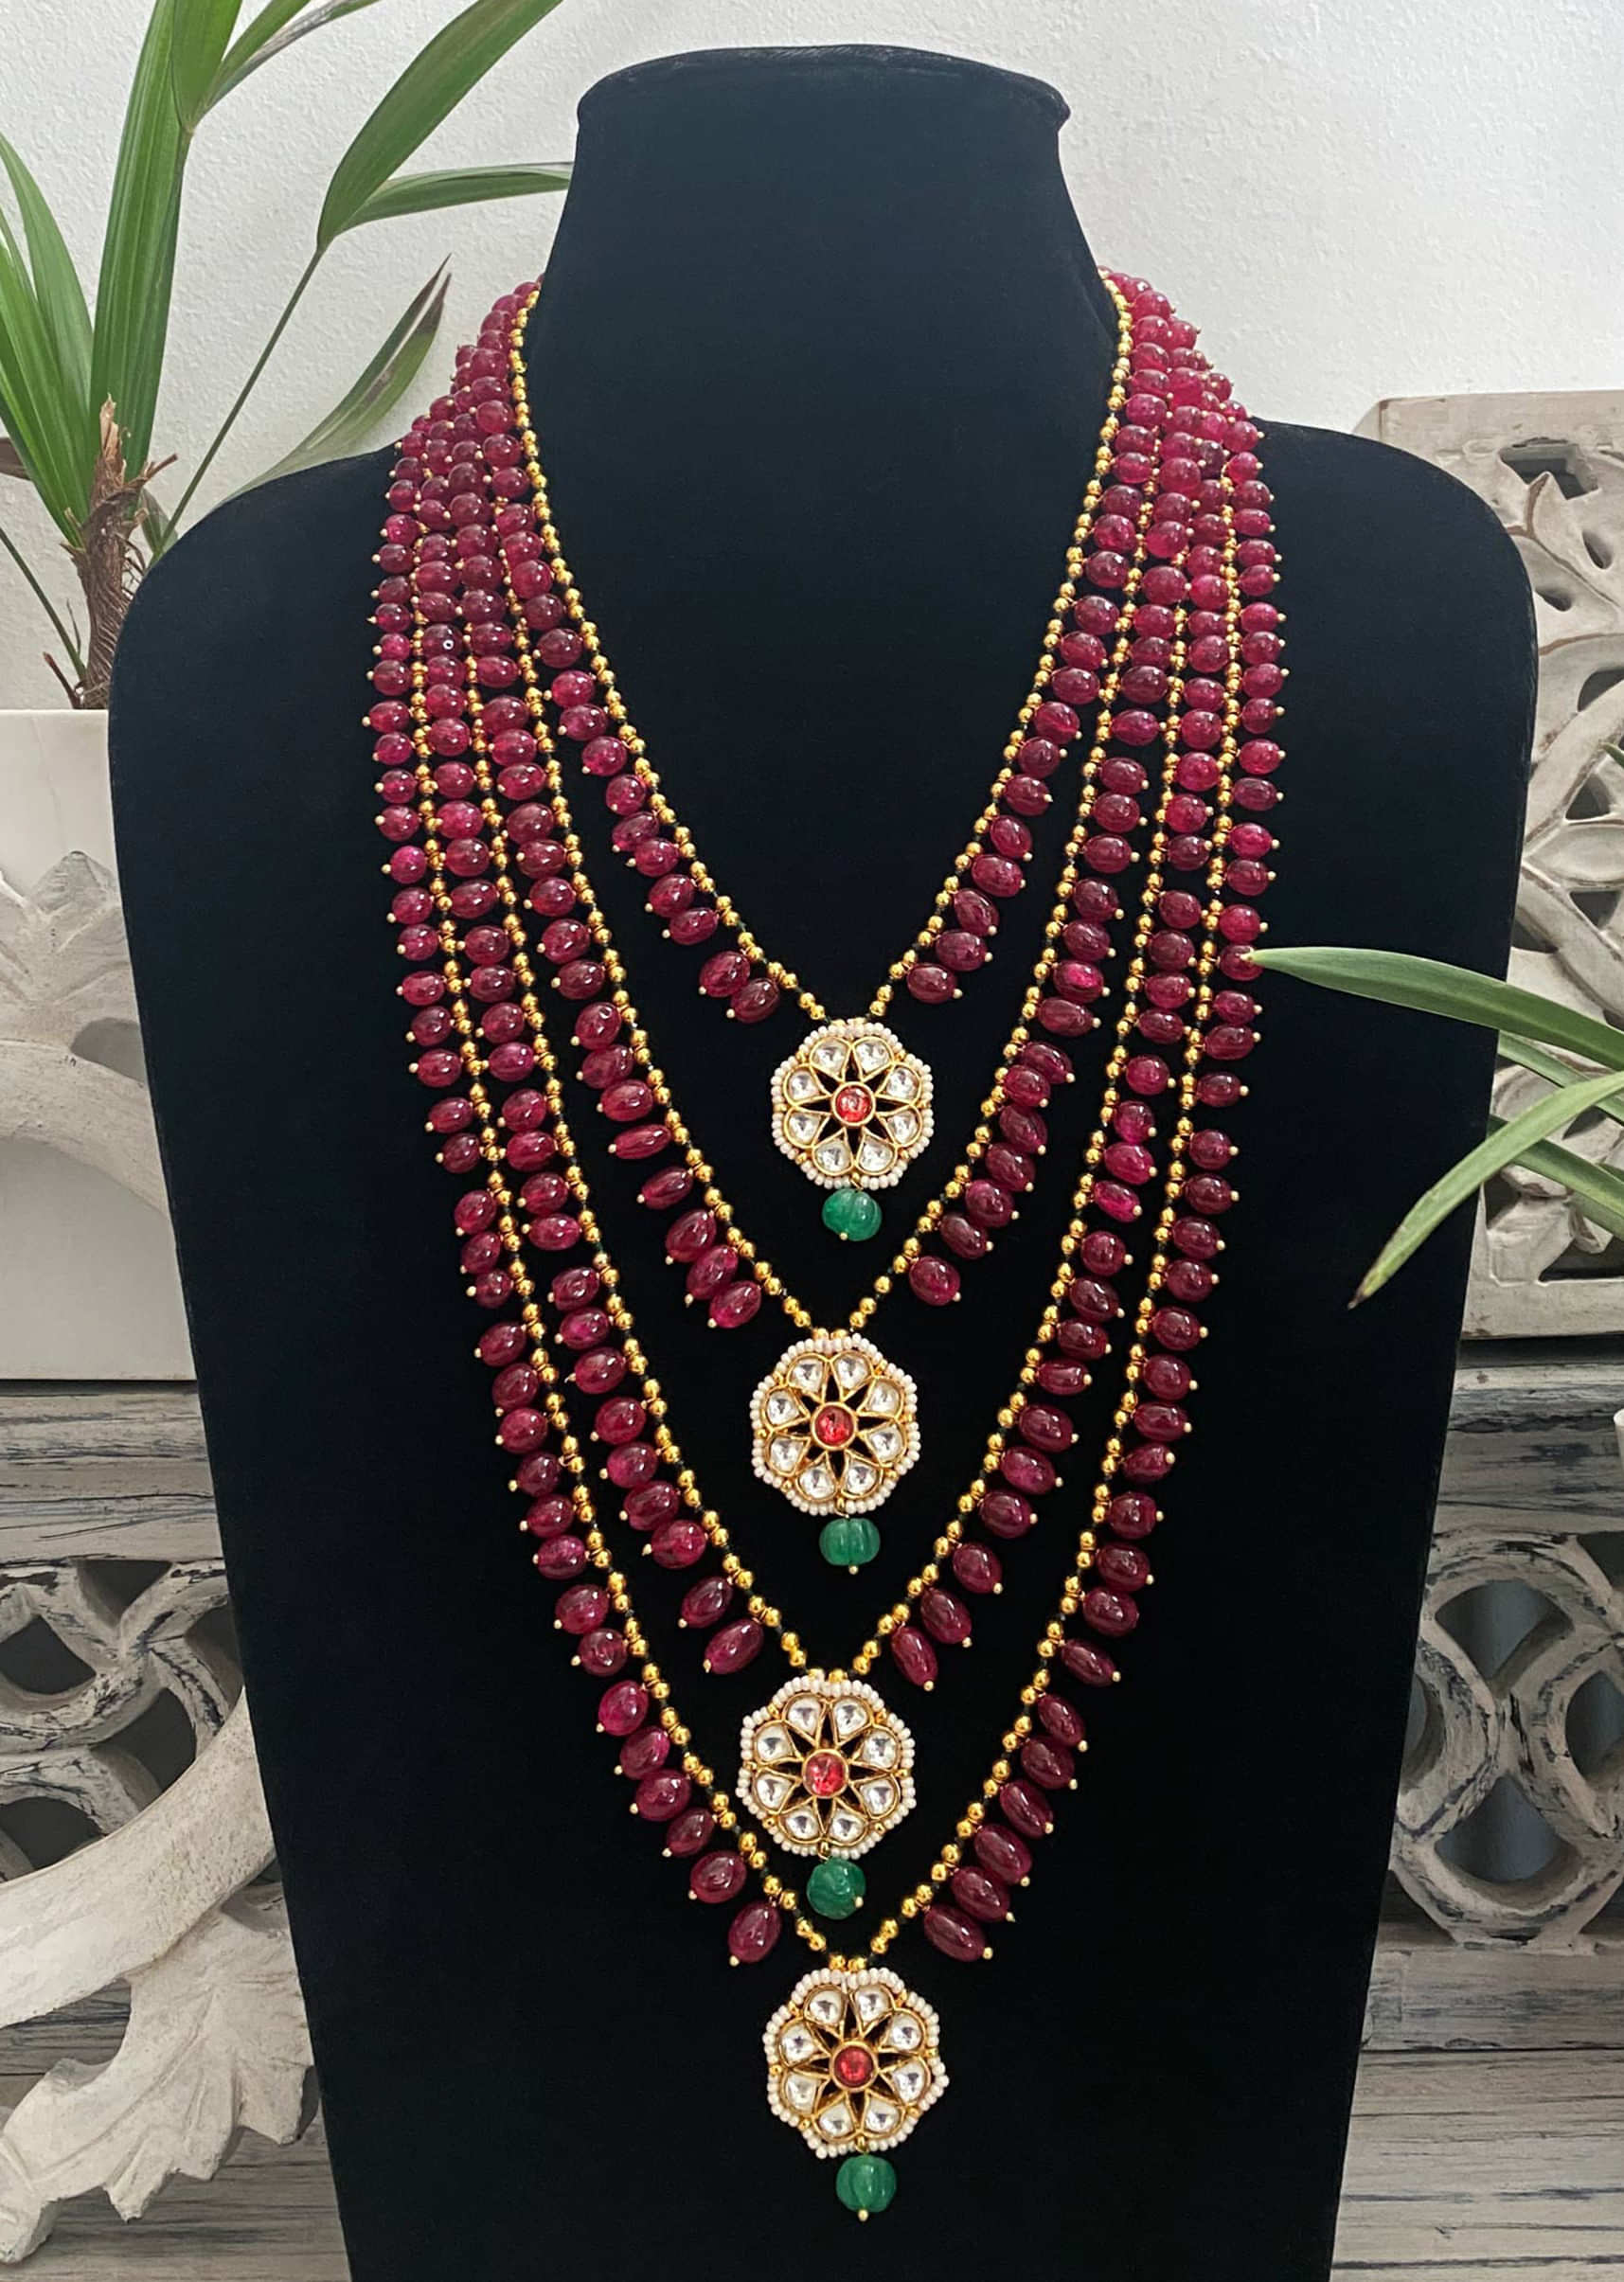 Red Layered Beads Necklace With Kundan Work And Shell Pearls